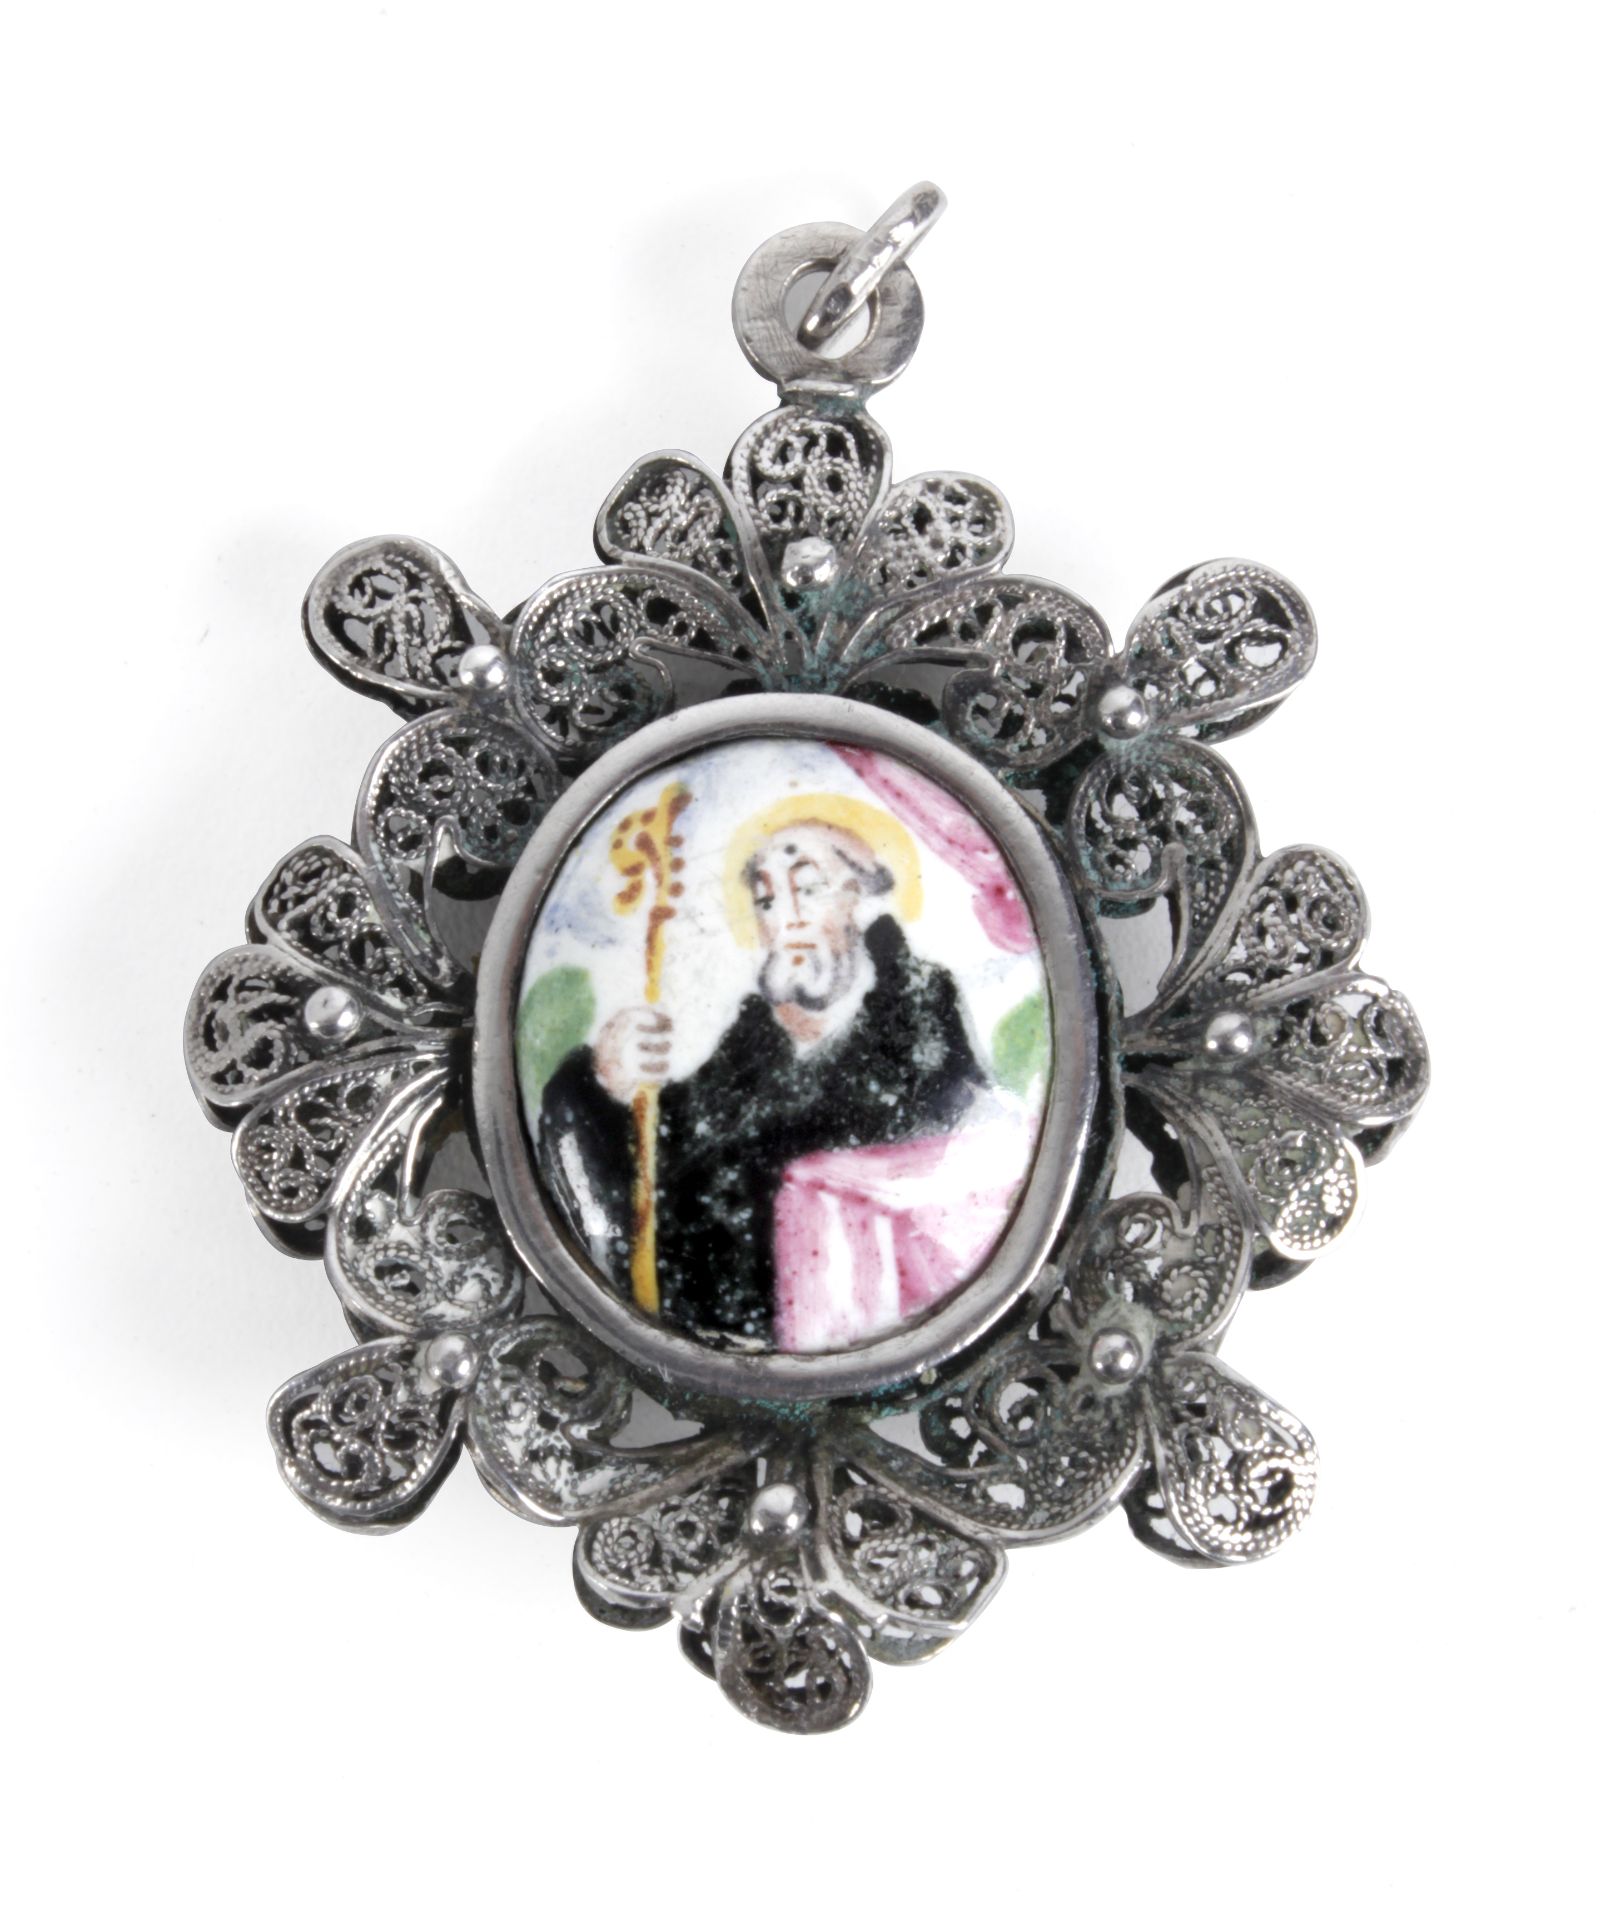 Late 18th century Spanish reliquary pendant in silver and porcelain